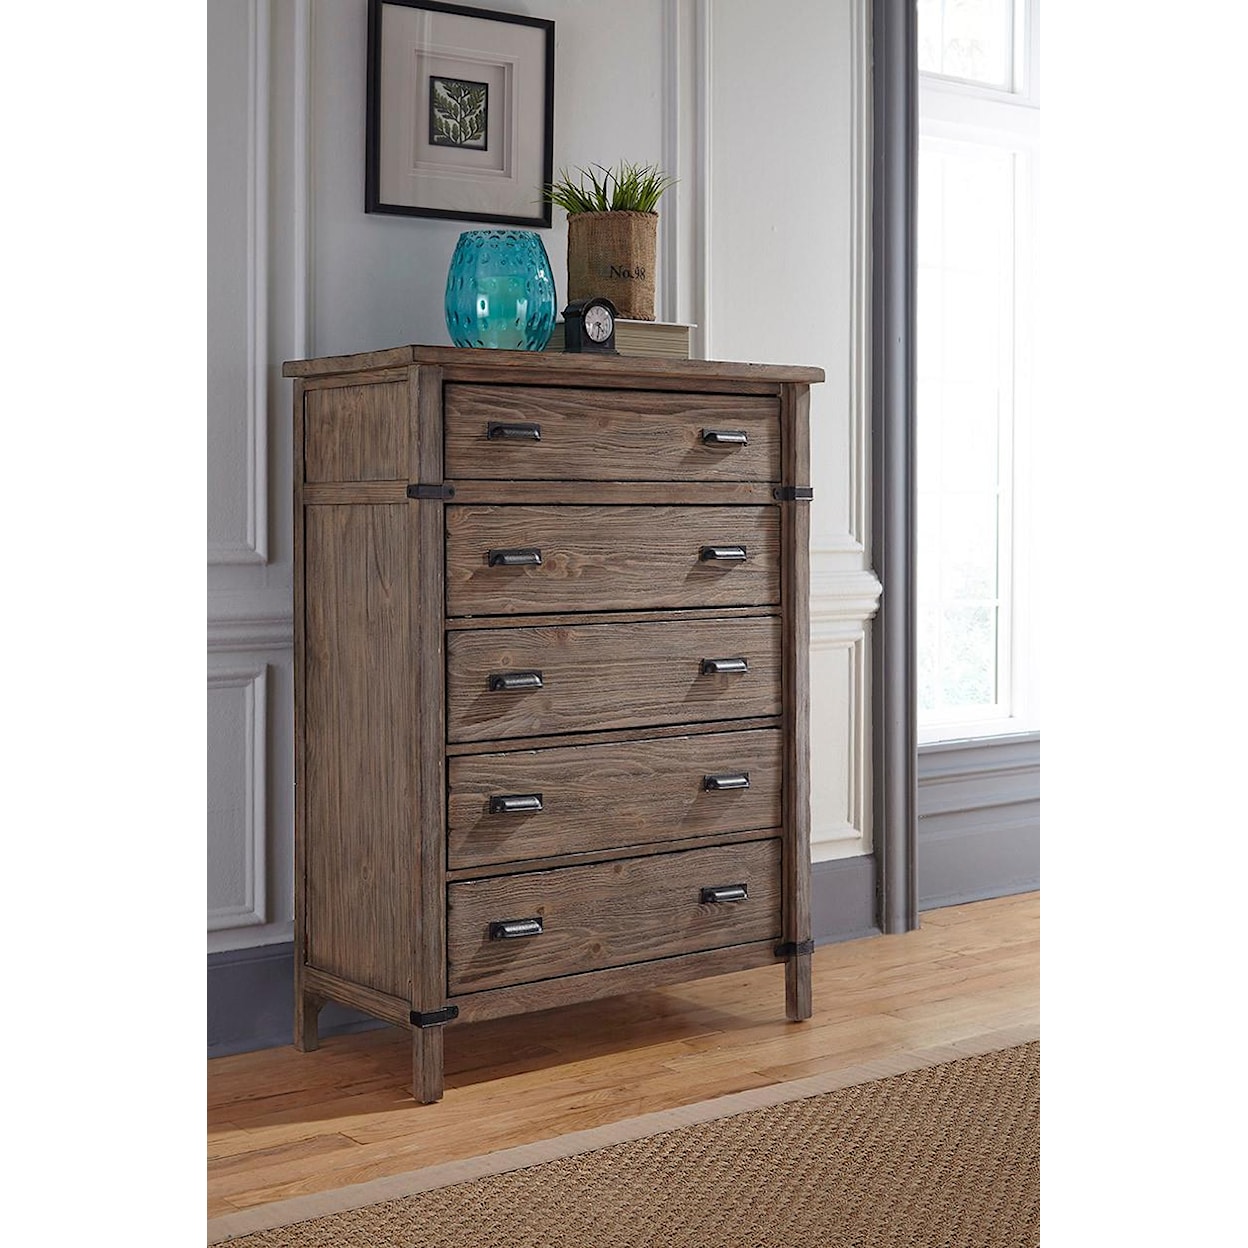 Kincaid Furniture Foundry Drawer Chest